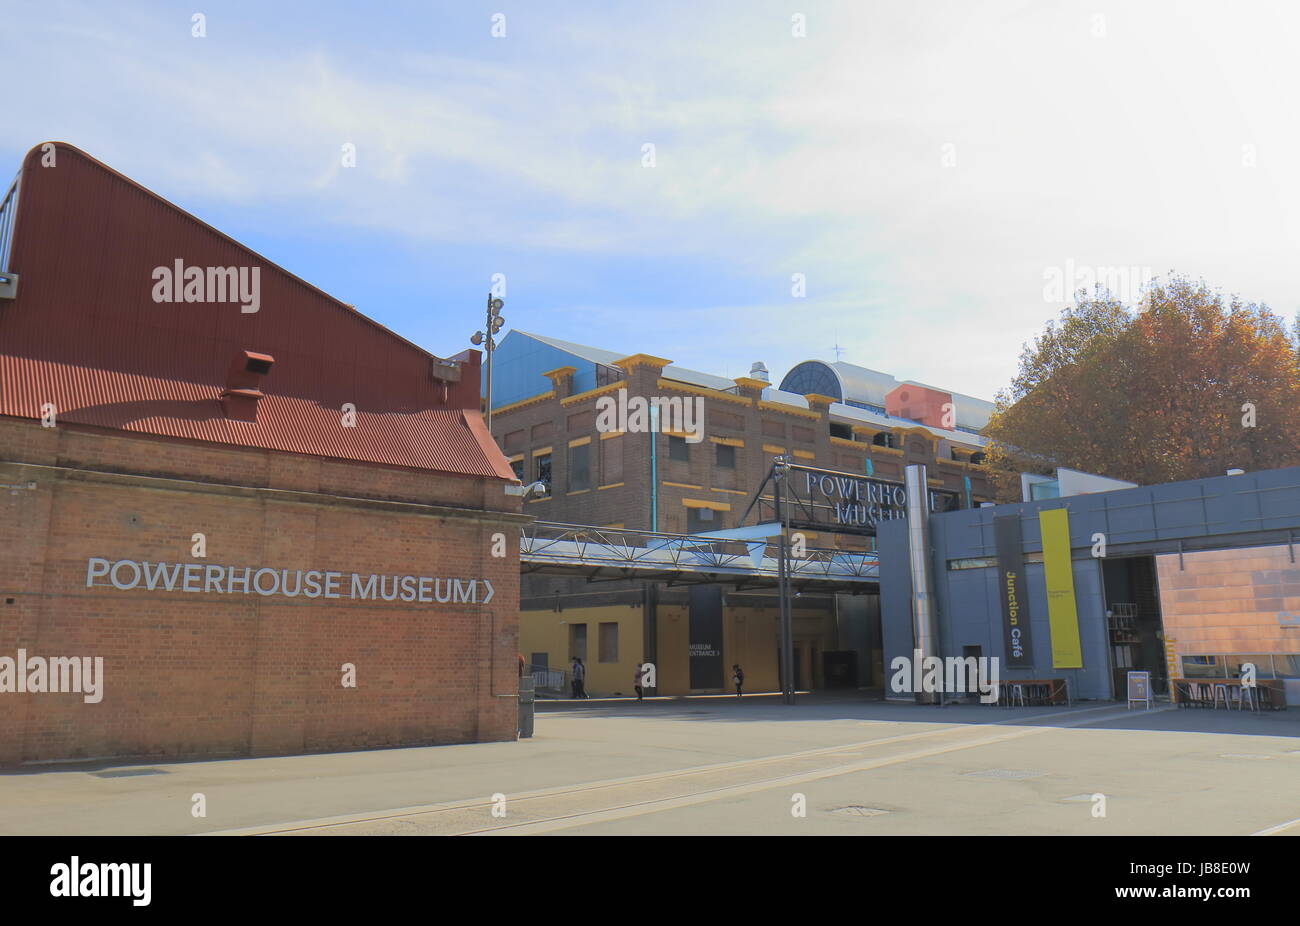 Powerhouse museum in Sydney Australia. Powerhouse museum is the major branch of the Museum of Applied Arts & Sciences in Sydney. Stock Photo